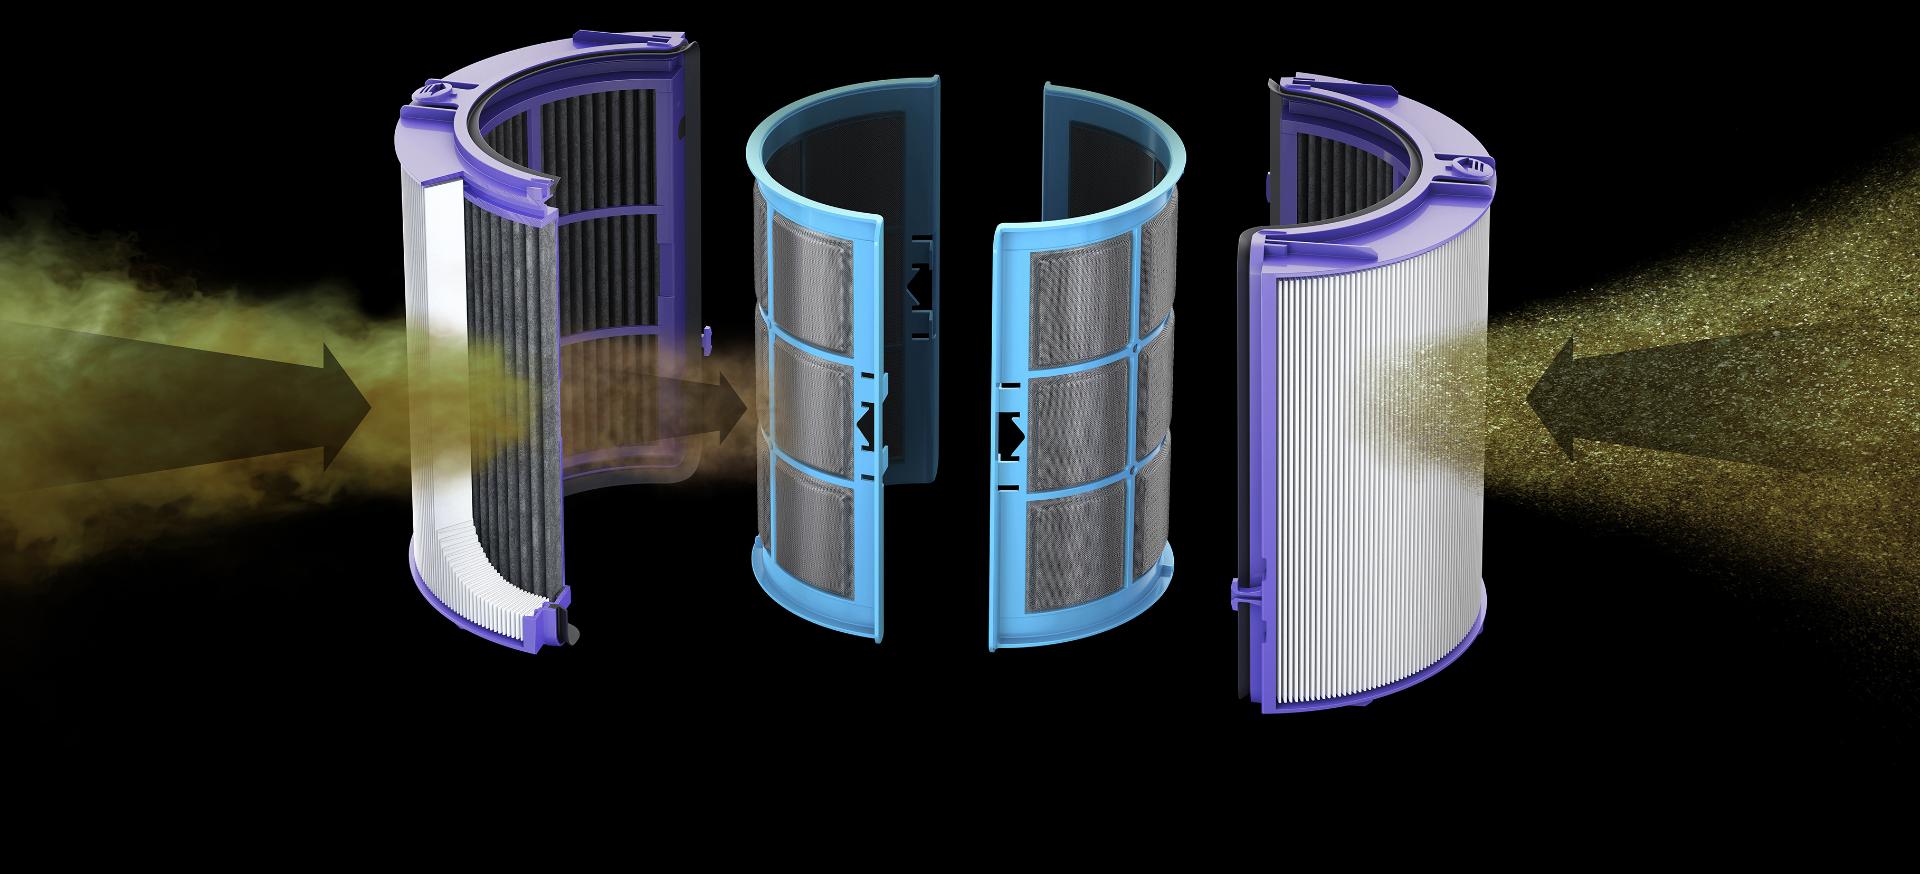 The Dyson Cryptomic purifier's filtration system, with arrows to indicate the combination filter capturing pollutants, and Cryptomic technology capturing formaldehyde.